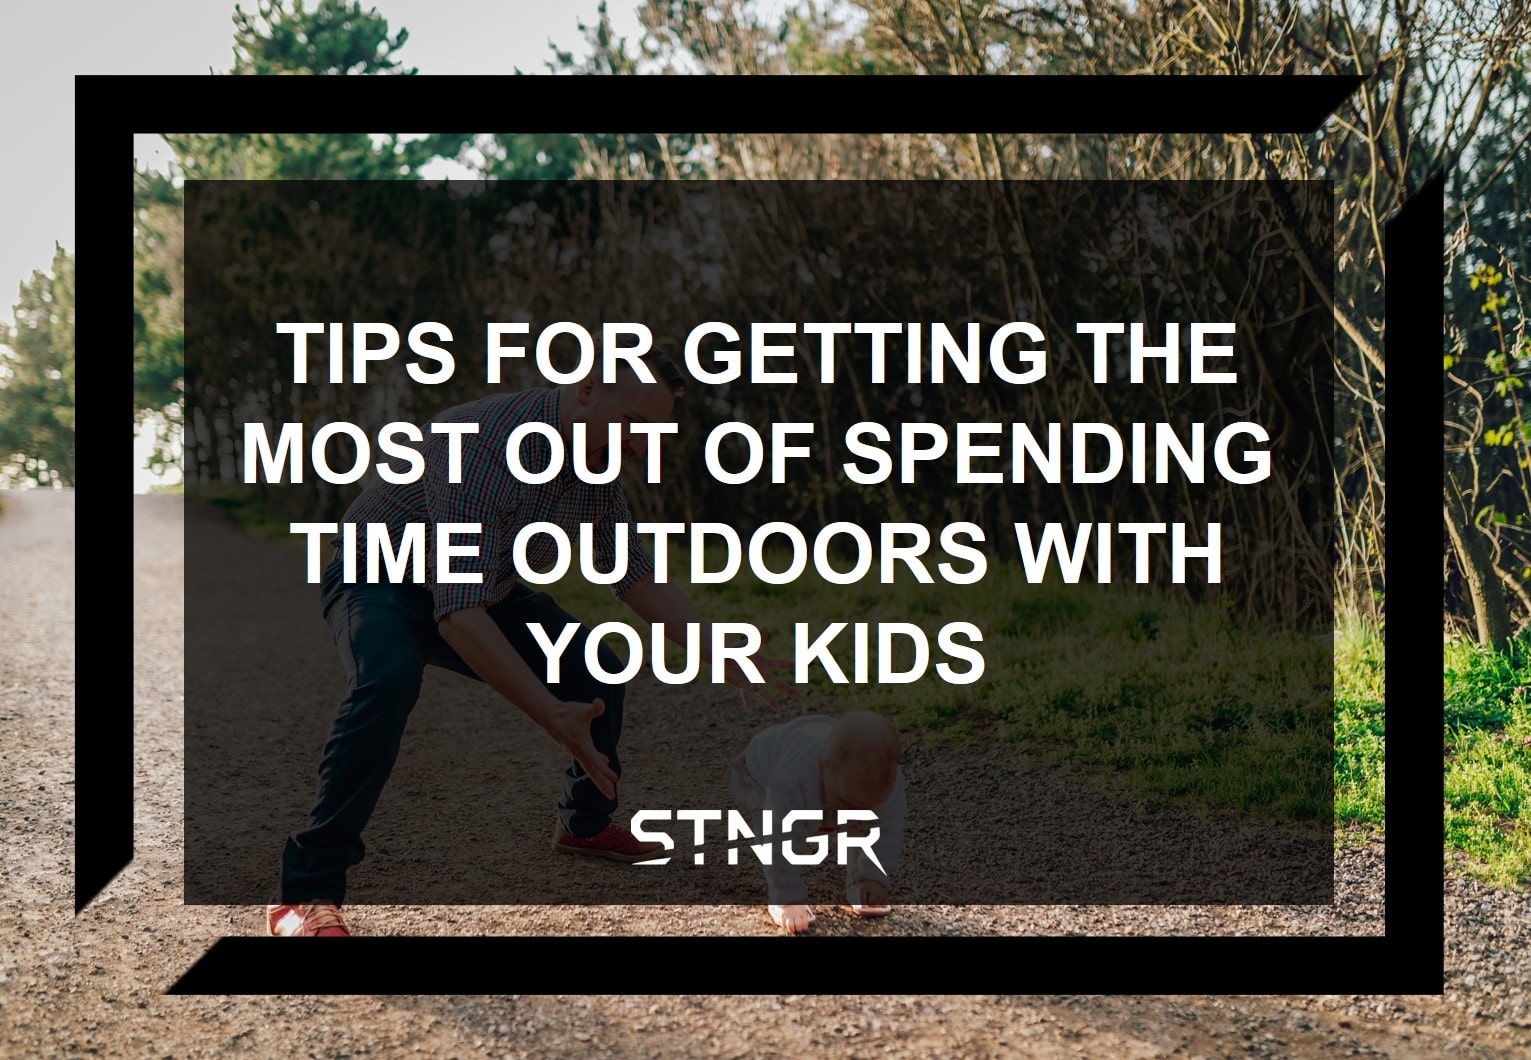 Tips For Getting The Most Out of Spending Time Outdoors With Your Kids